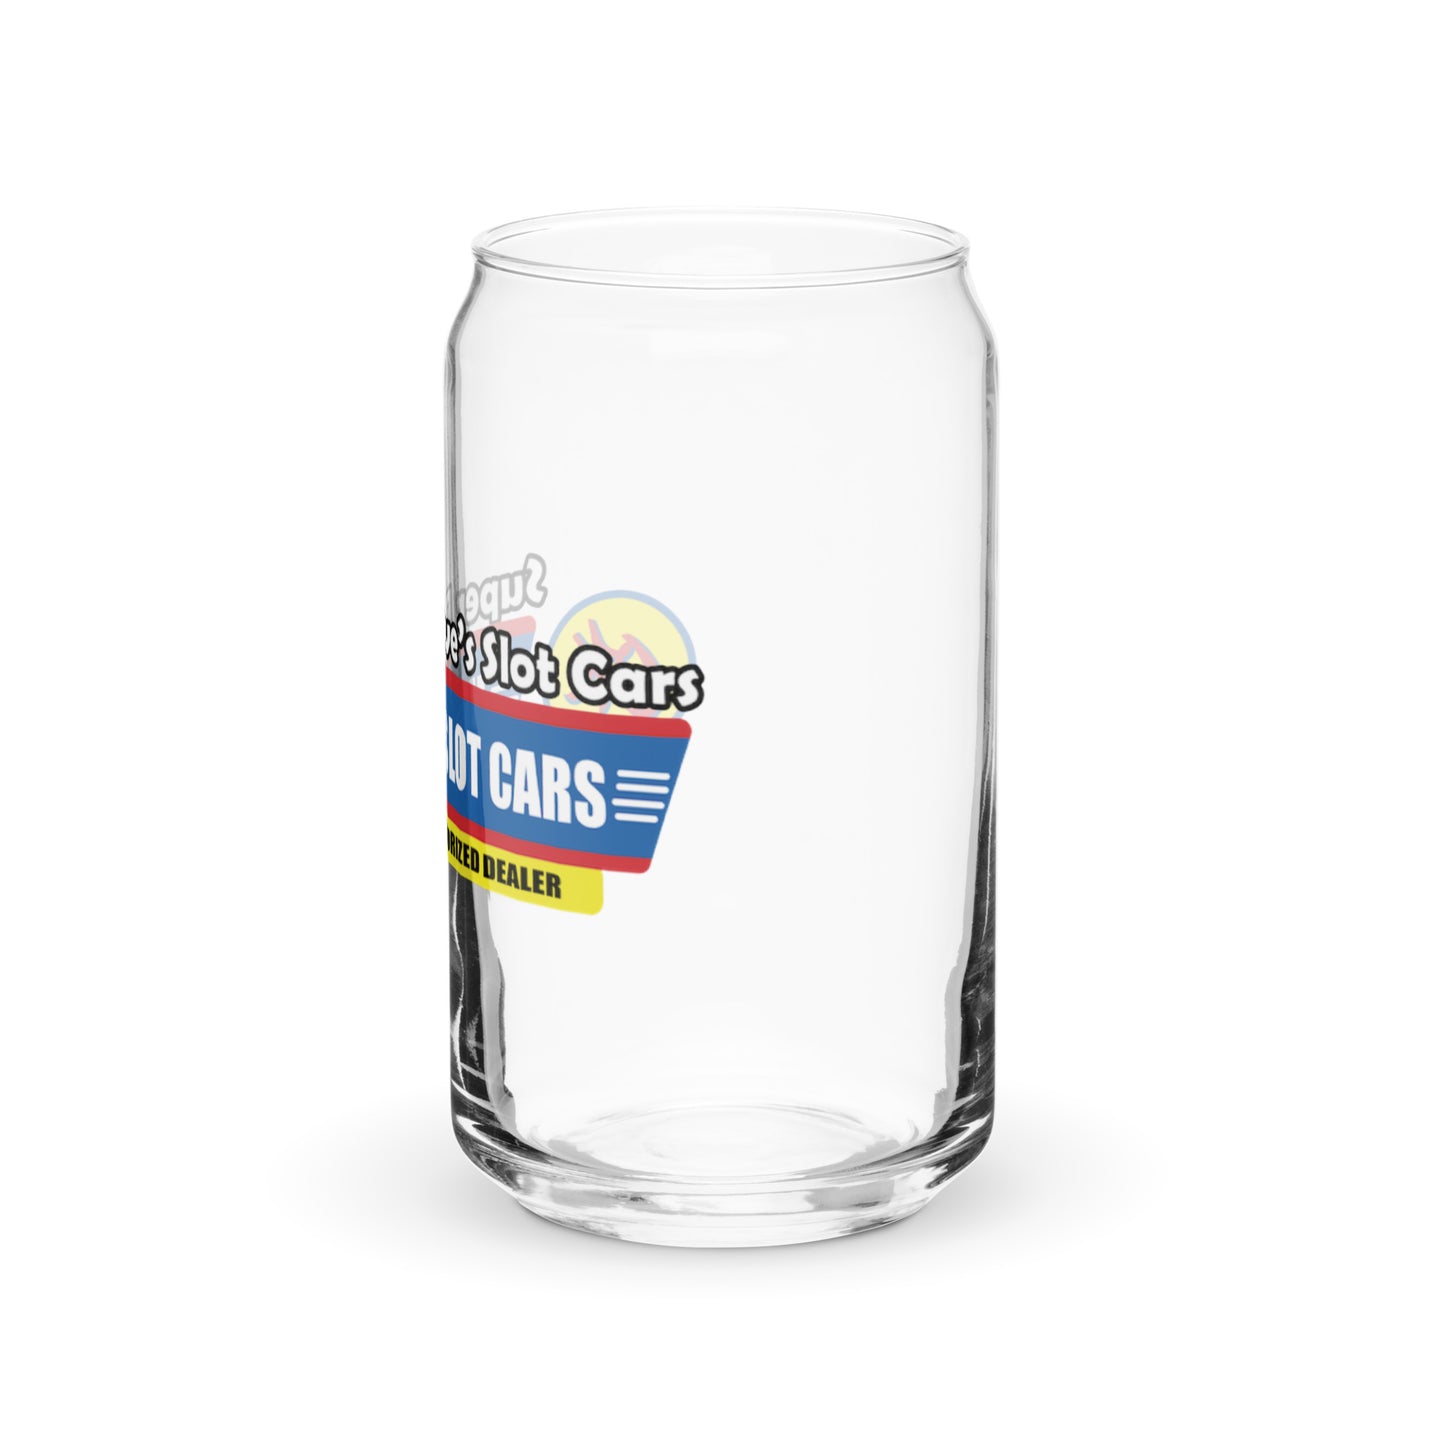 Super Dave's Can-Shaped Glass